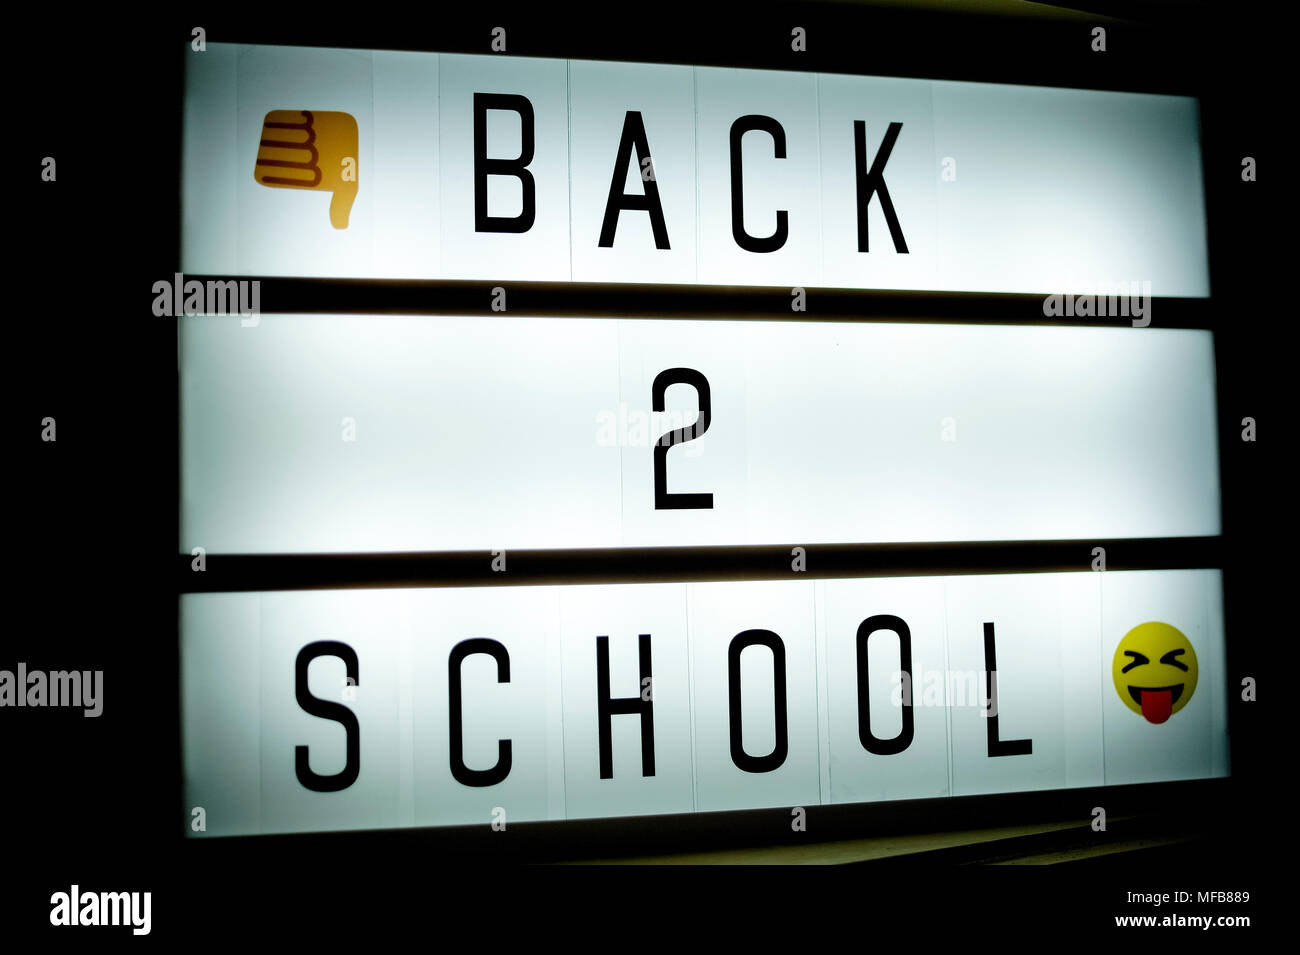 Back to school illuminated sign announcement Stock Photo